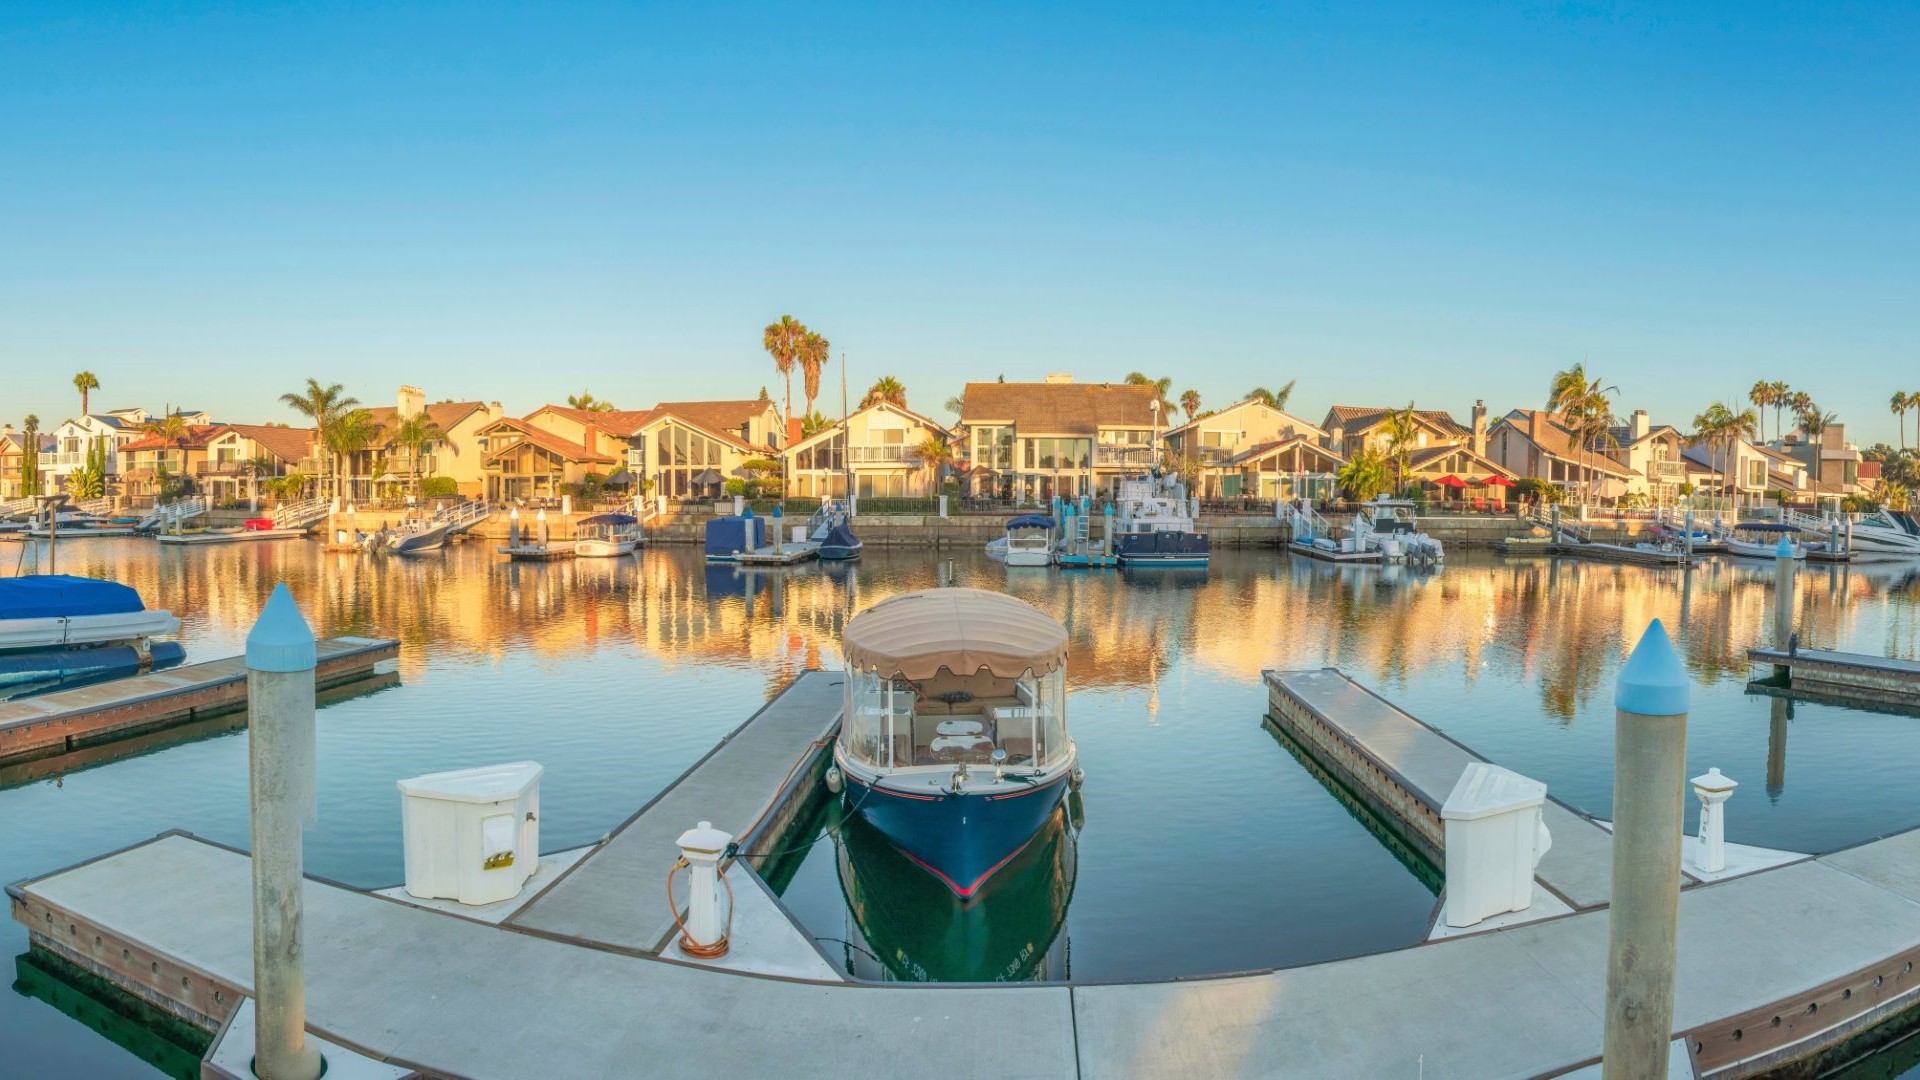 A small boat docked in Coronado Cays with waterfront homes in the background